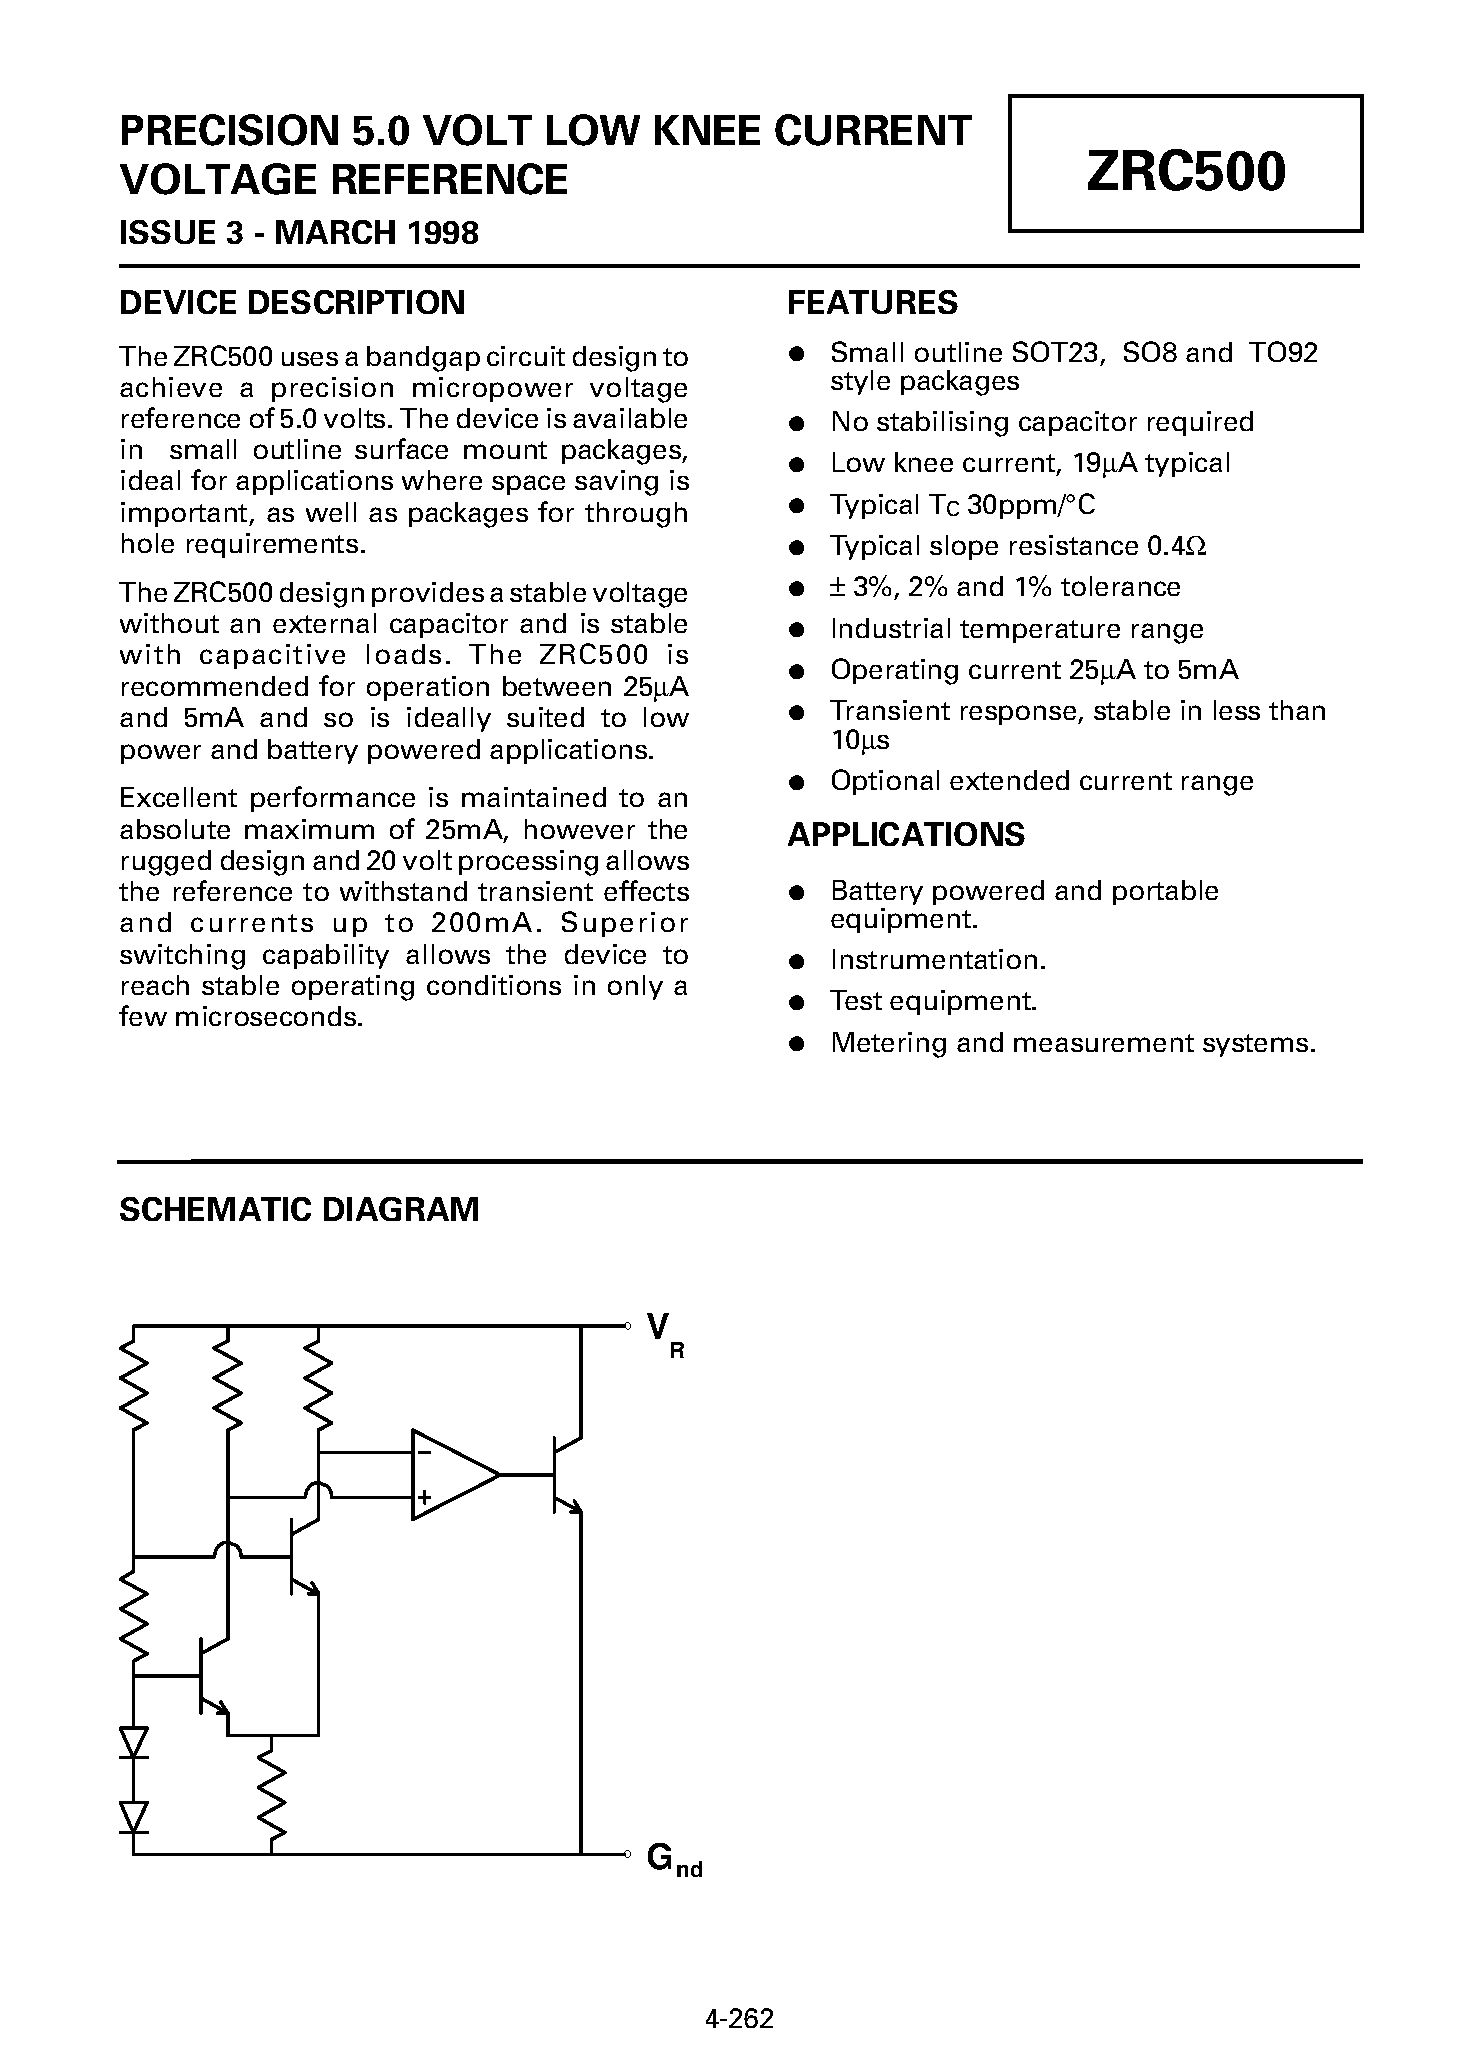 Datasheet ZRC500Y01 - PRECISION 5.0 VOLT LOW KNEE CURRENT VOLTAGE REFERENCE page 1